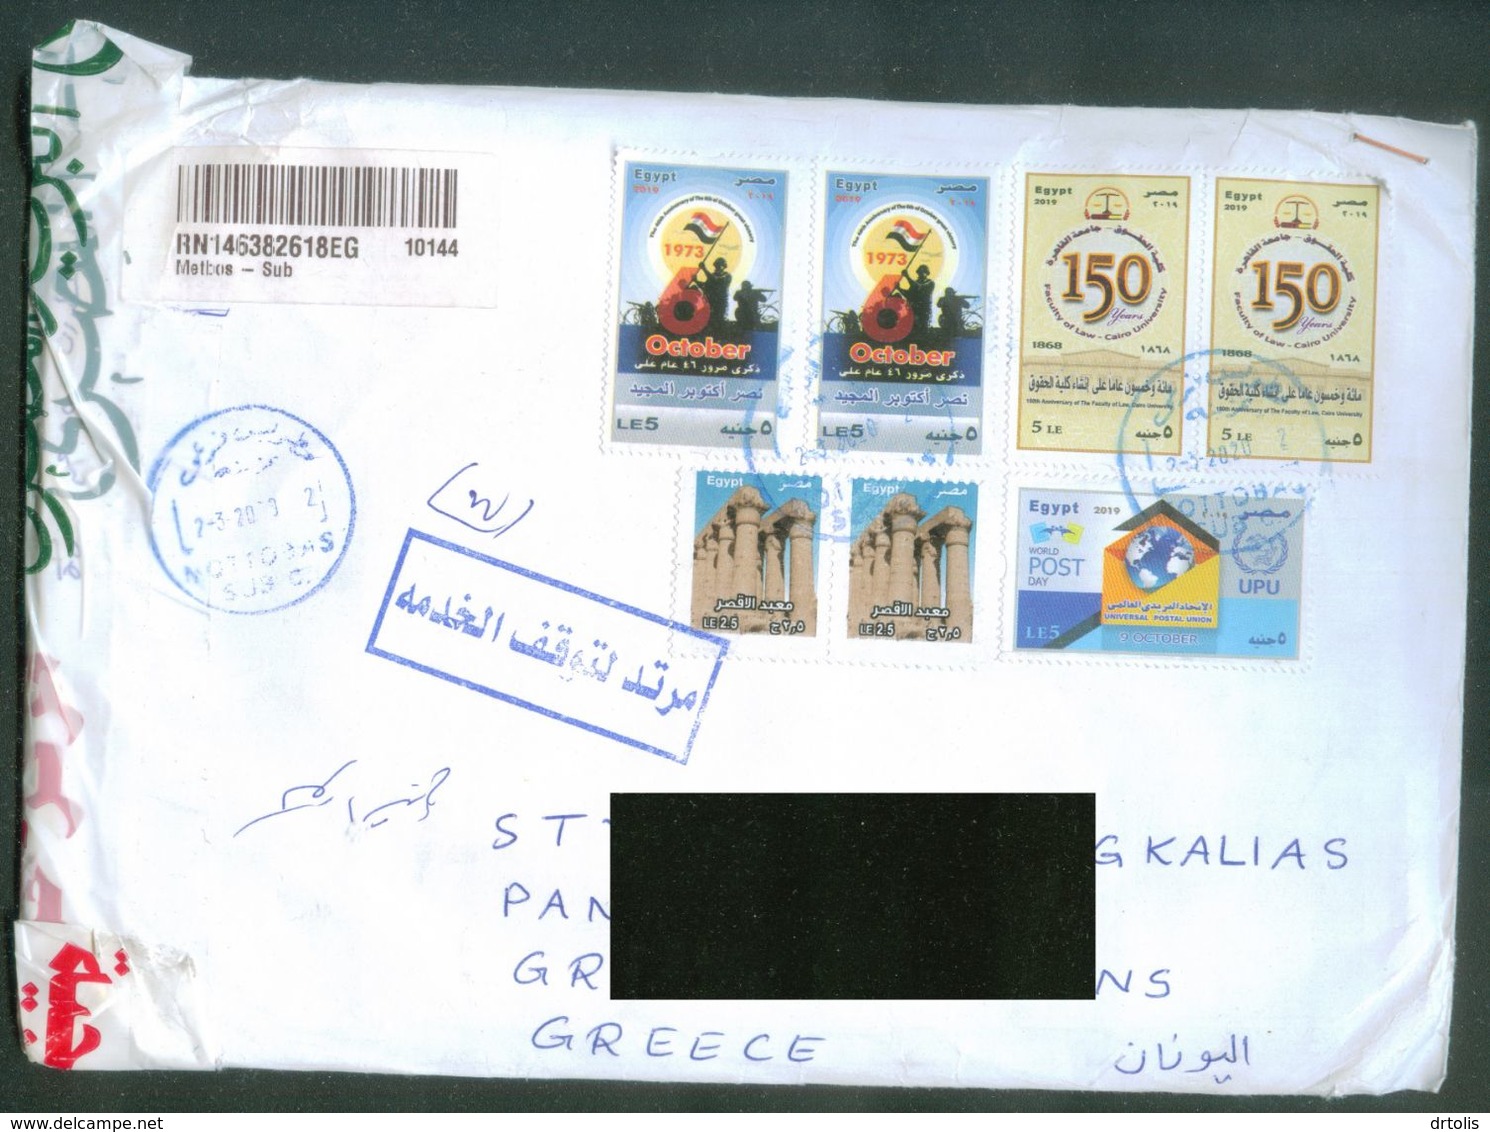 EGYPT / 2020 / PANDEMIC " STOP SERVICE " CASHET CENSORED LETTER / INCLUDING 2 GANDHI STAMPS / INDIA - Covers & Documents